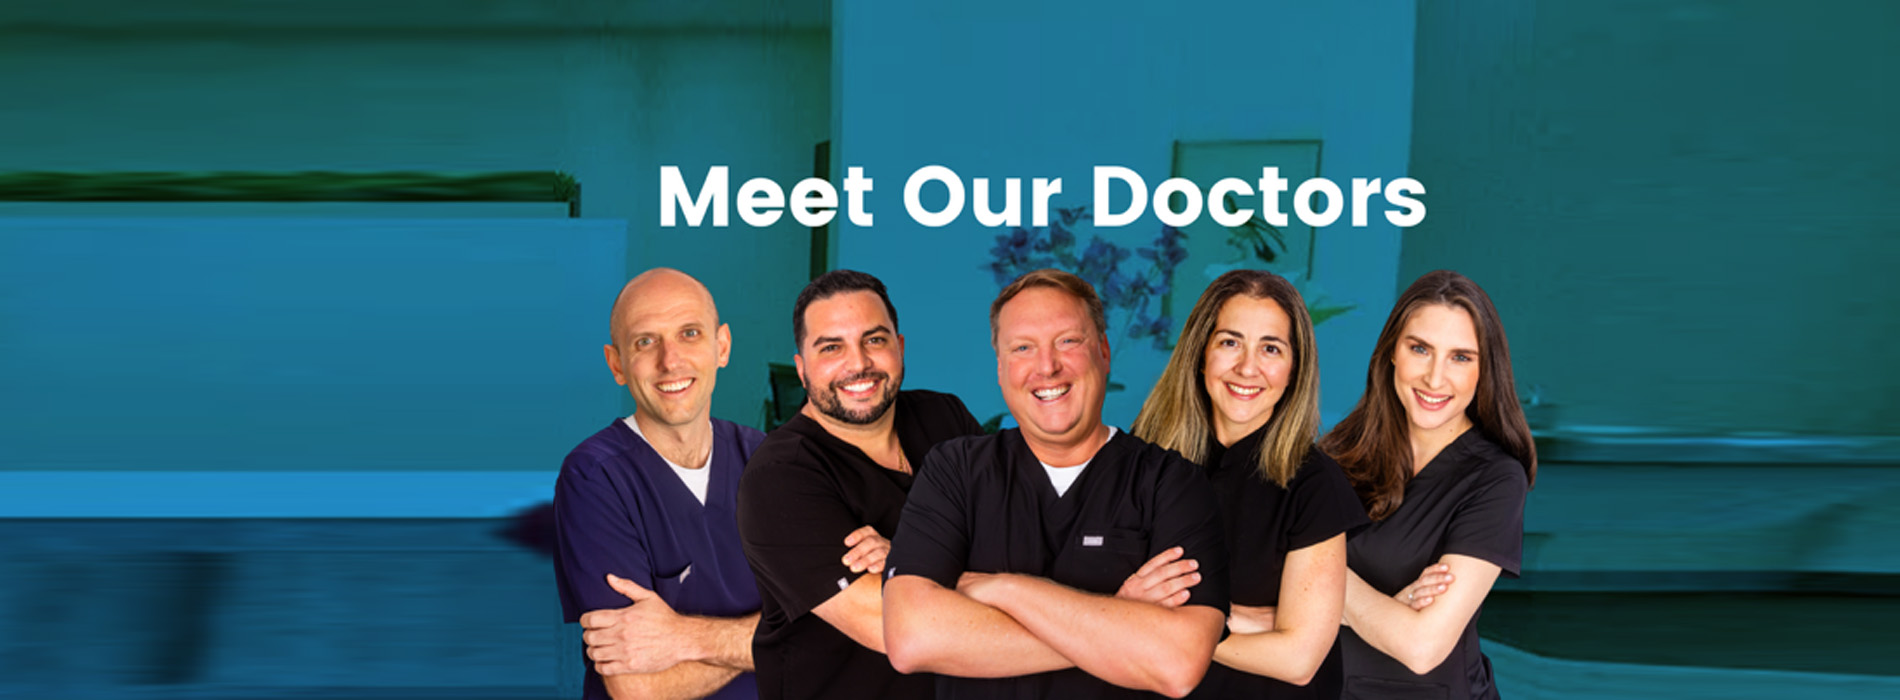 The image is a vertical banner featuring a group of people posing for a photo. At the top, there s text that reads  MEET OUR DOCTORS,  followed by a list of names and professional titles of individuals who appear to be medical professionals. Each person is smiling and looking directly at the camera. The background is plain and does not provide any additional context or information about the location or event.